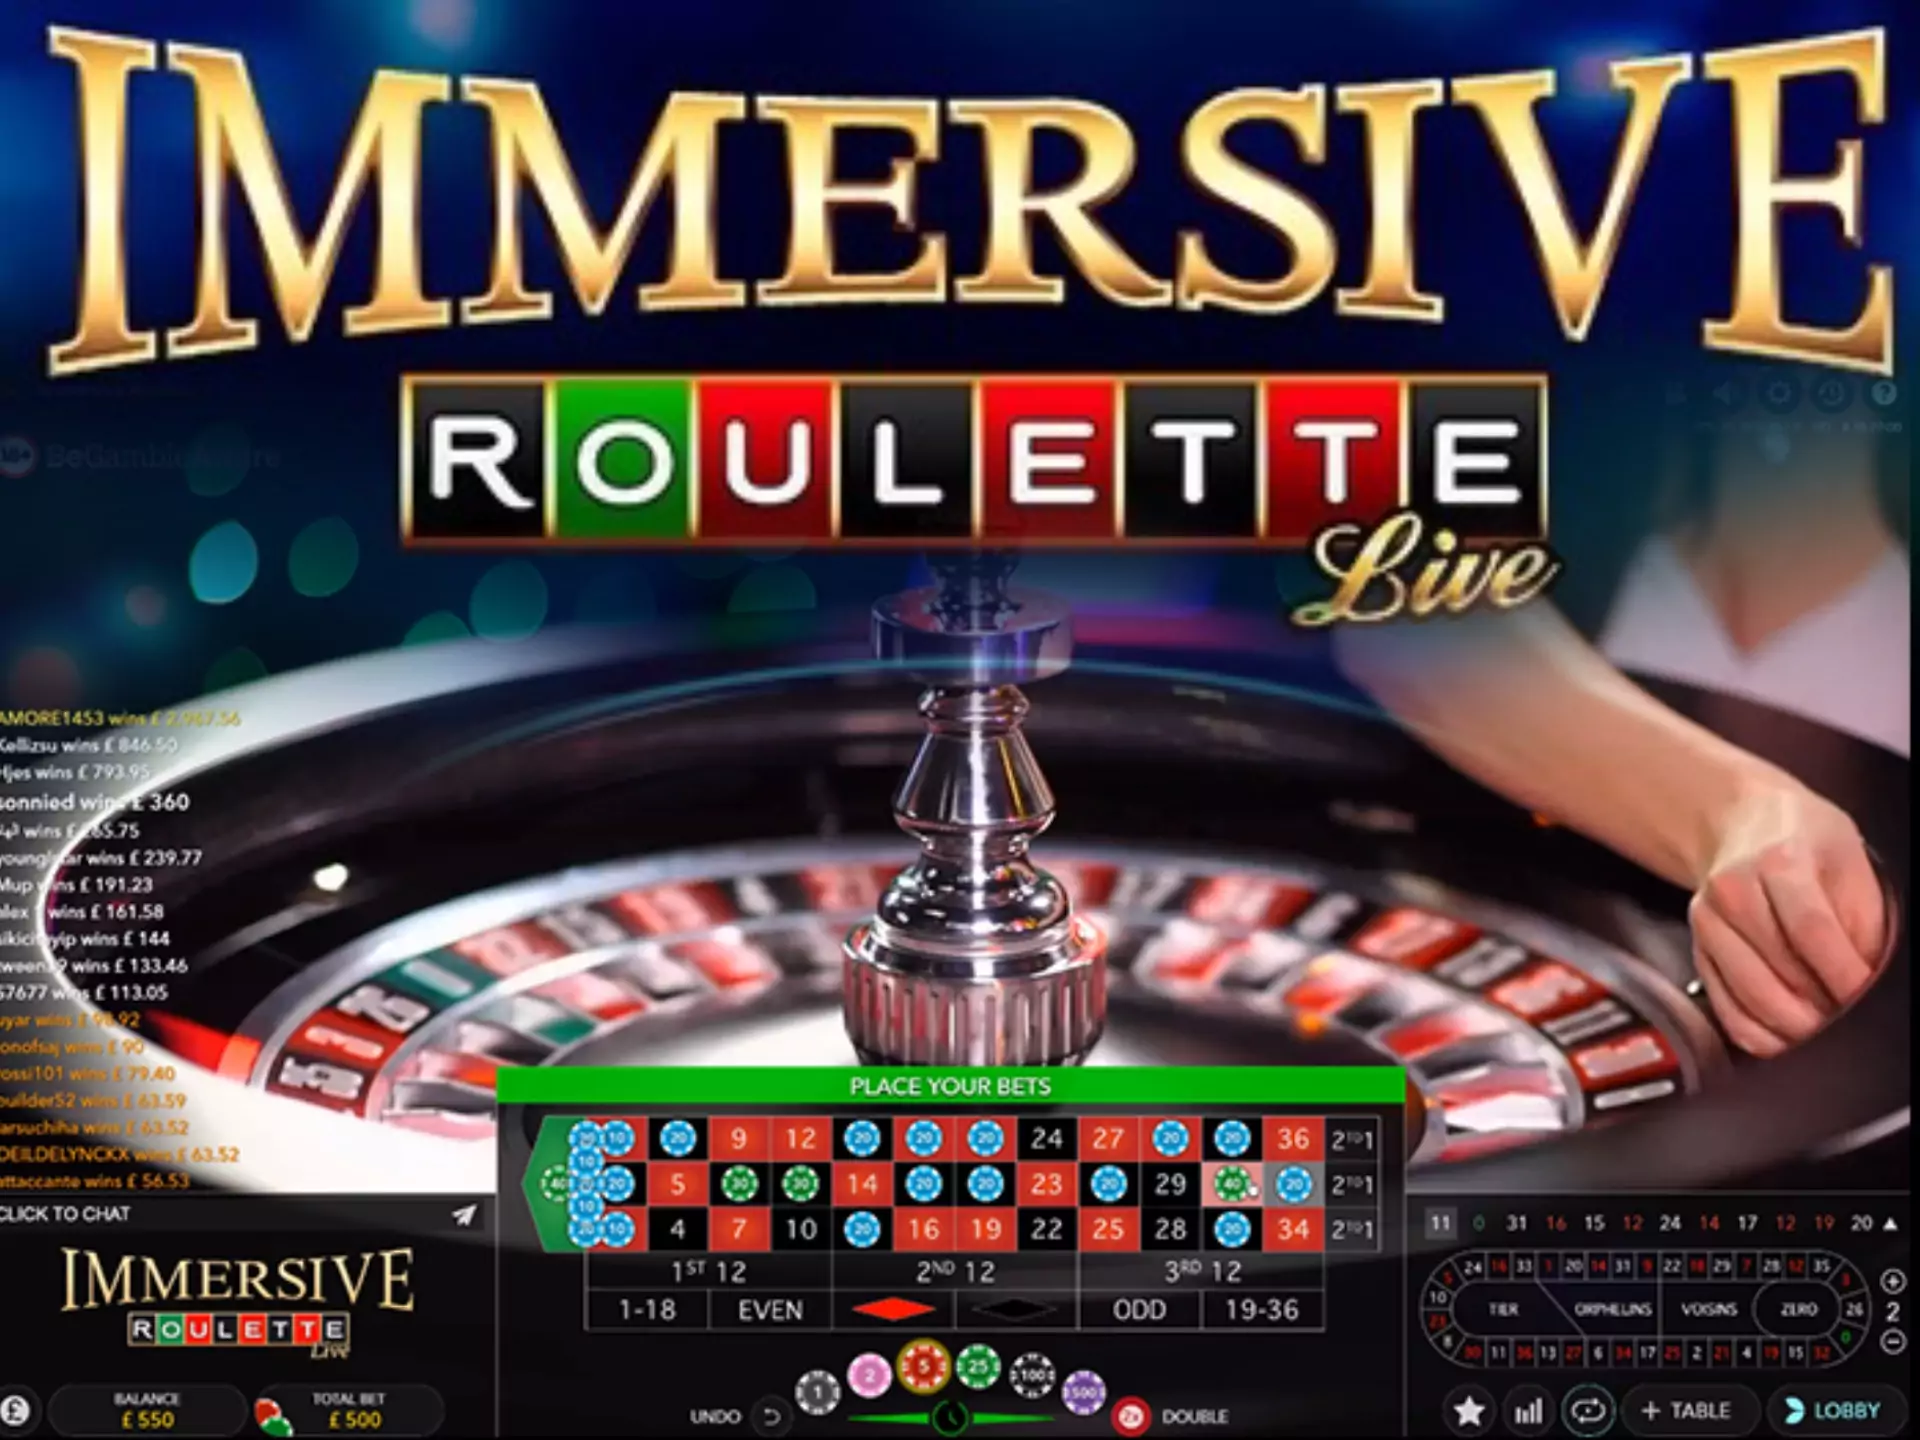 Play Immersive roulette to get a new experience in live gambling.